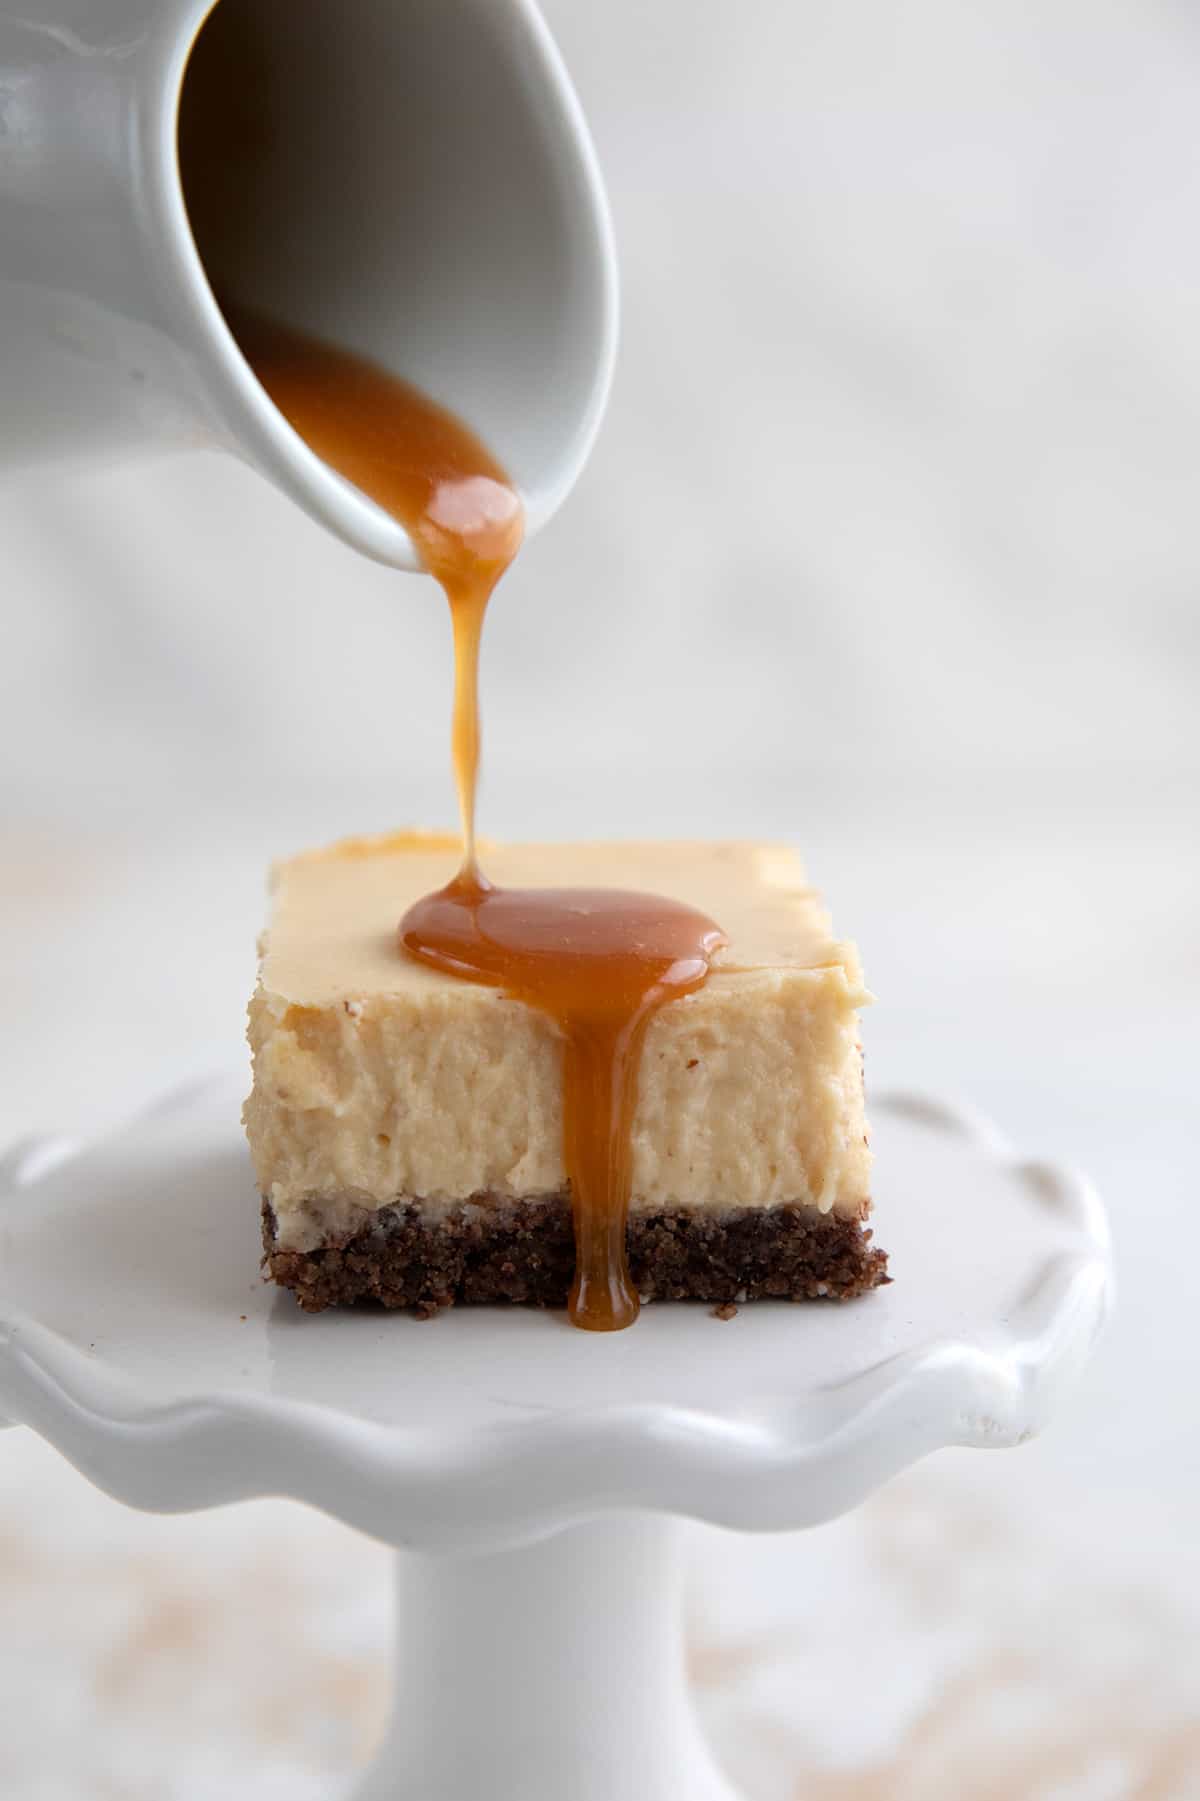 Keto caramel sauce being poured over a cheesecake bar.